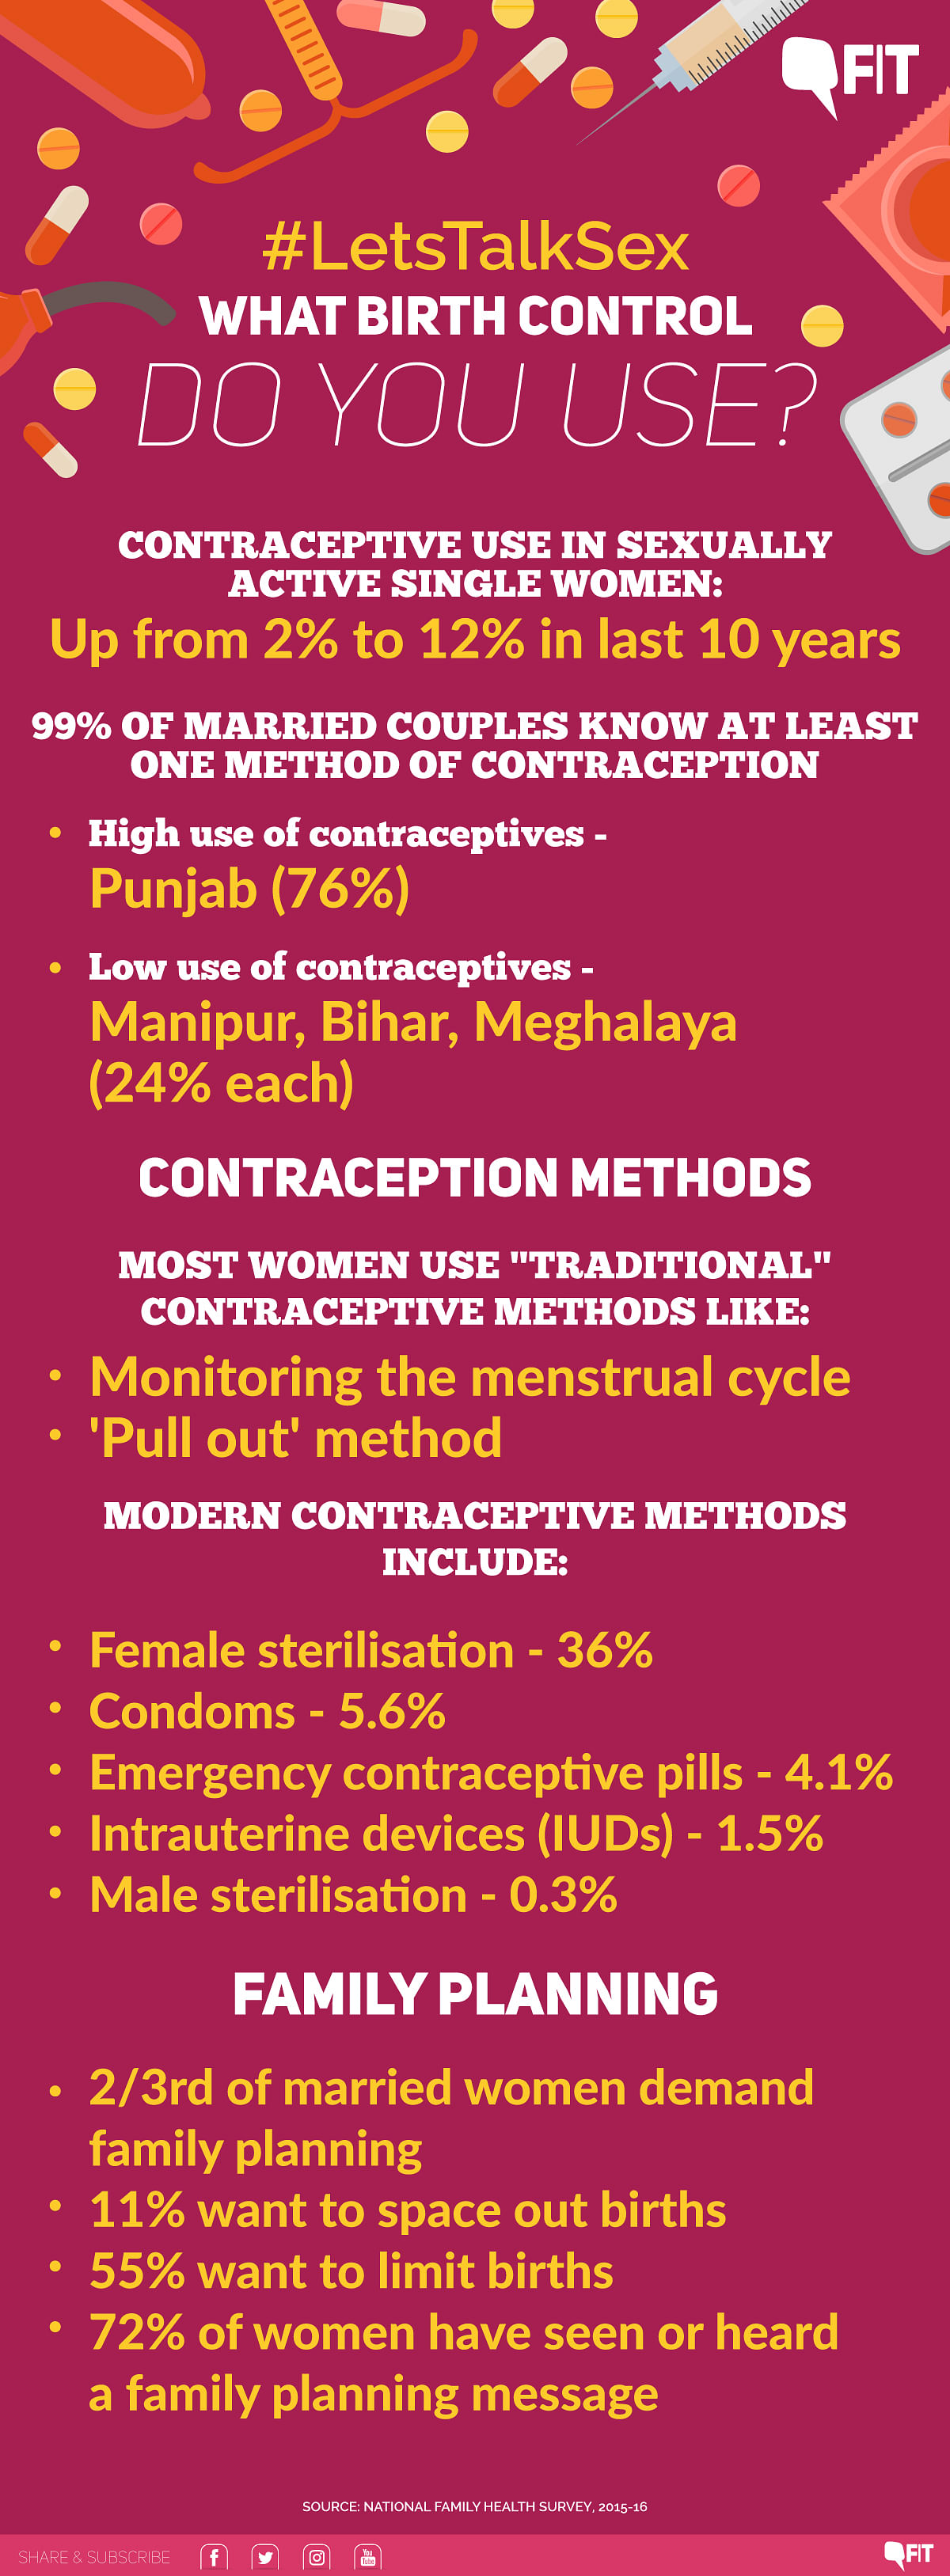 As per a survey, sexually active unmarried women are demanding and using modern contraceptive methods 